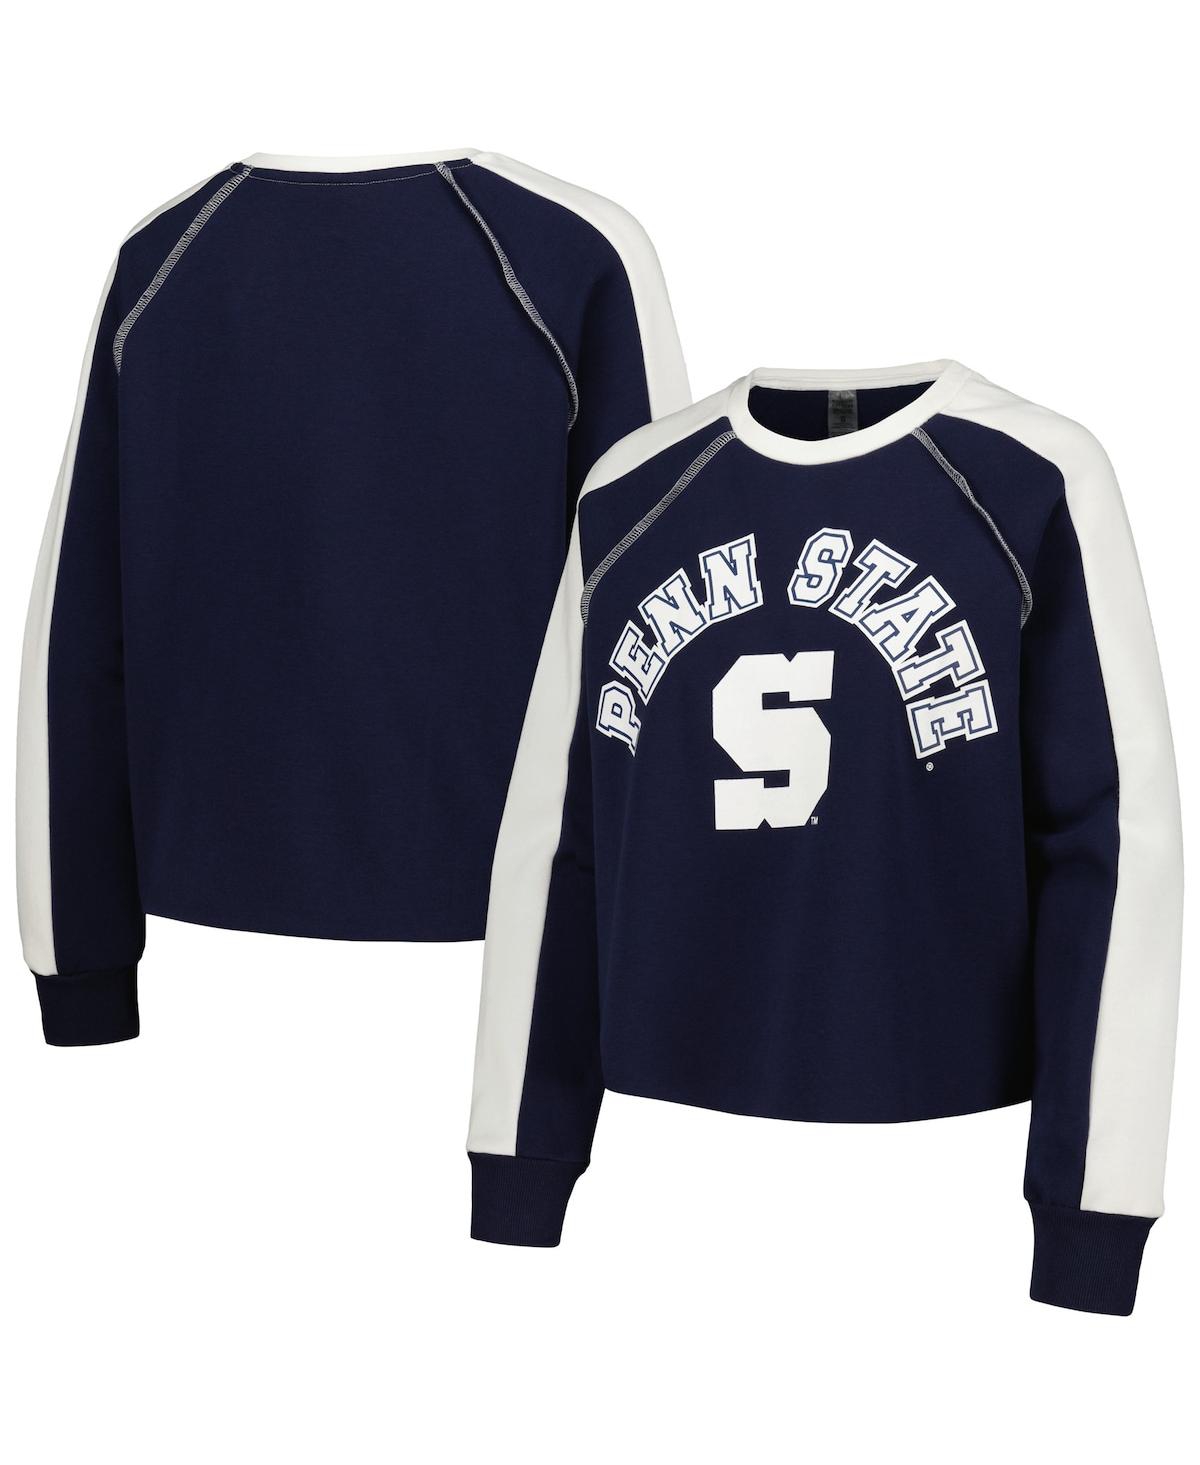 Shop Gameday Couture Women's  Navy Penn State Nittany Lions Blindside Raglanâ Cropped Pullover Sweatshirt